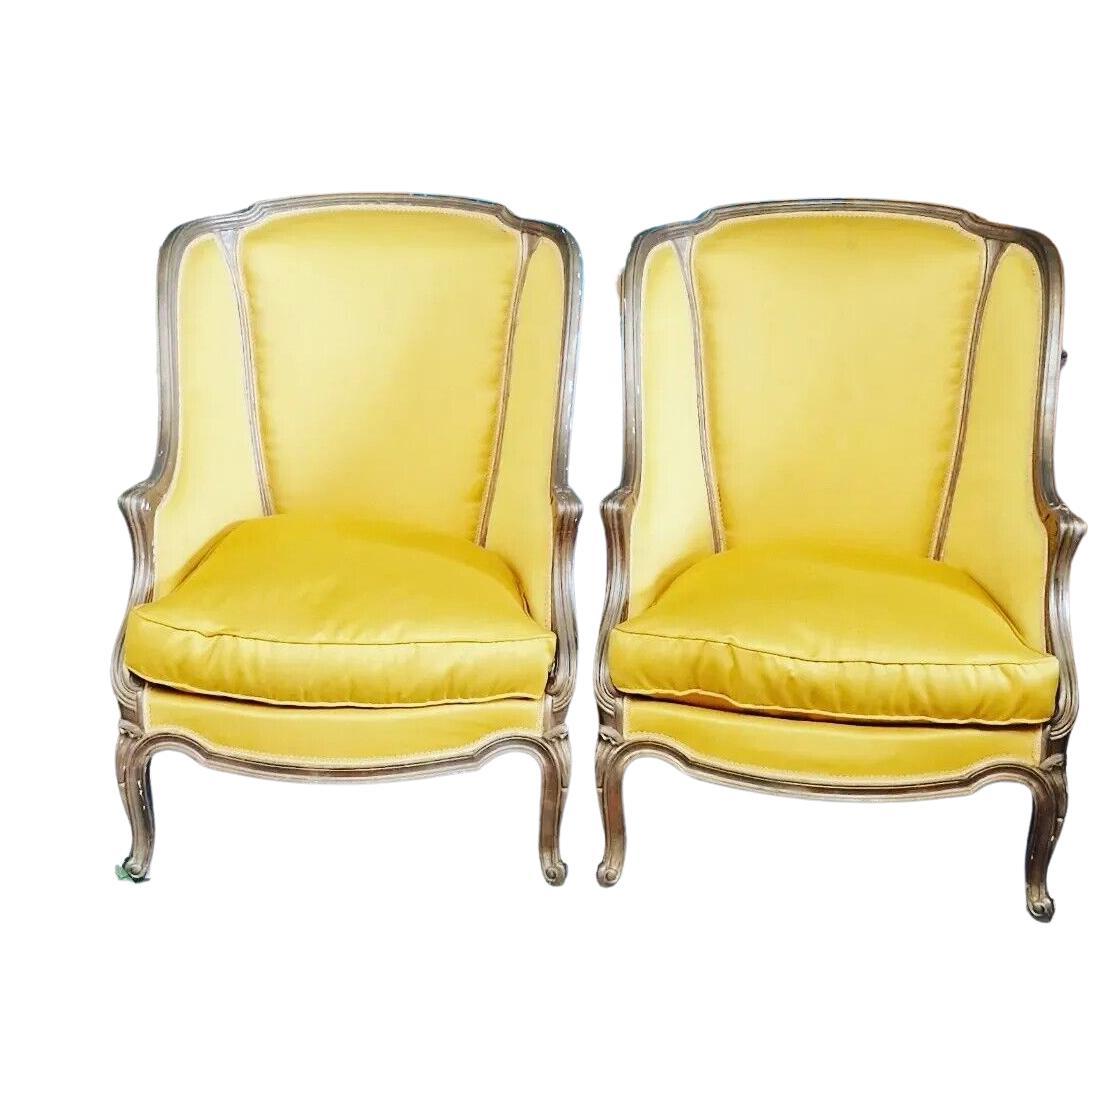 Pair of Antique Armchairs French 19th Century Yellow Silk Upholstery Bergère   